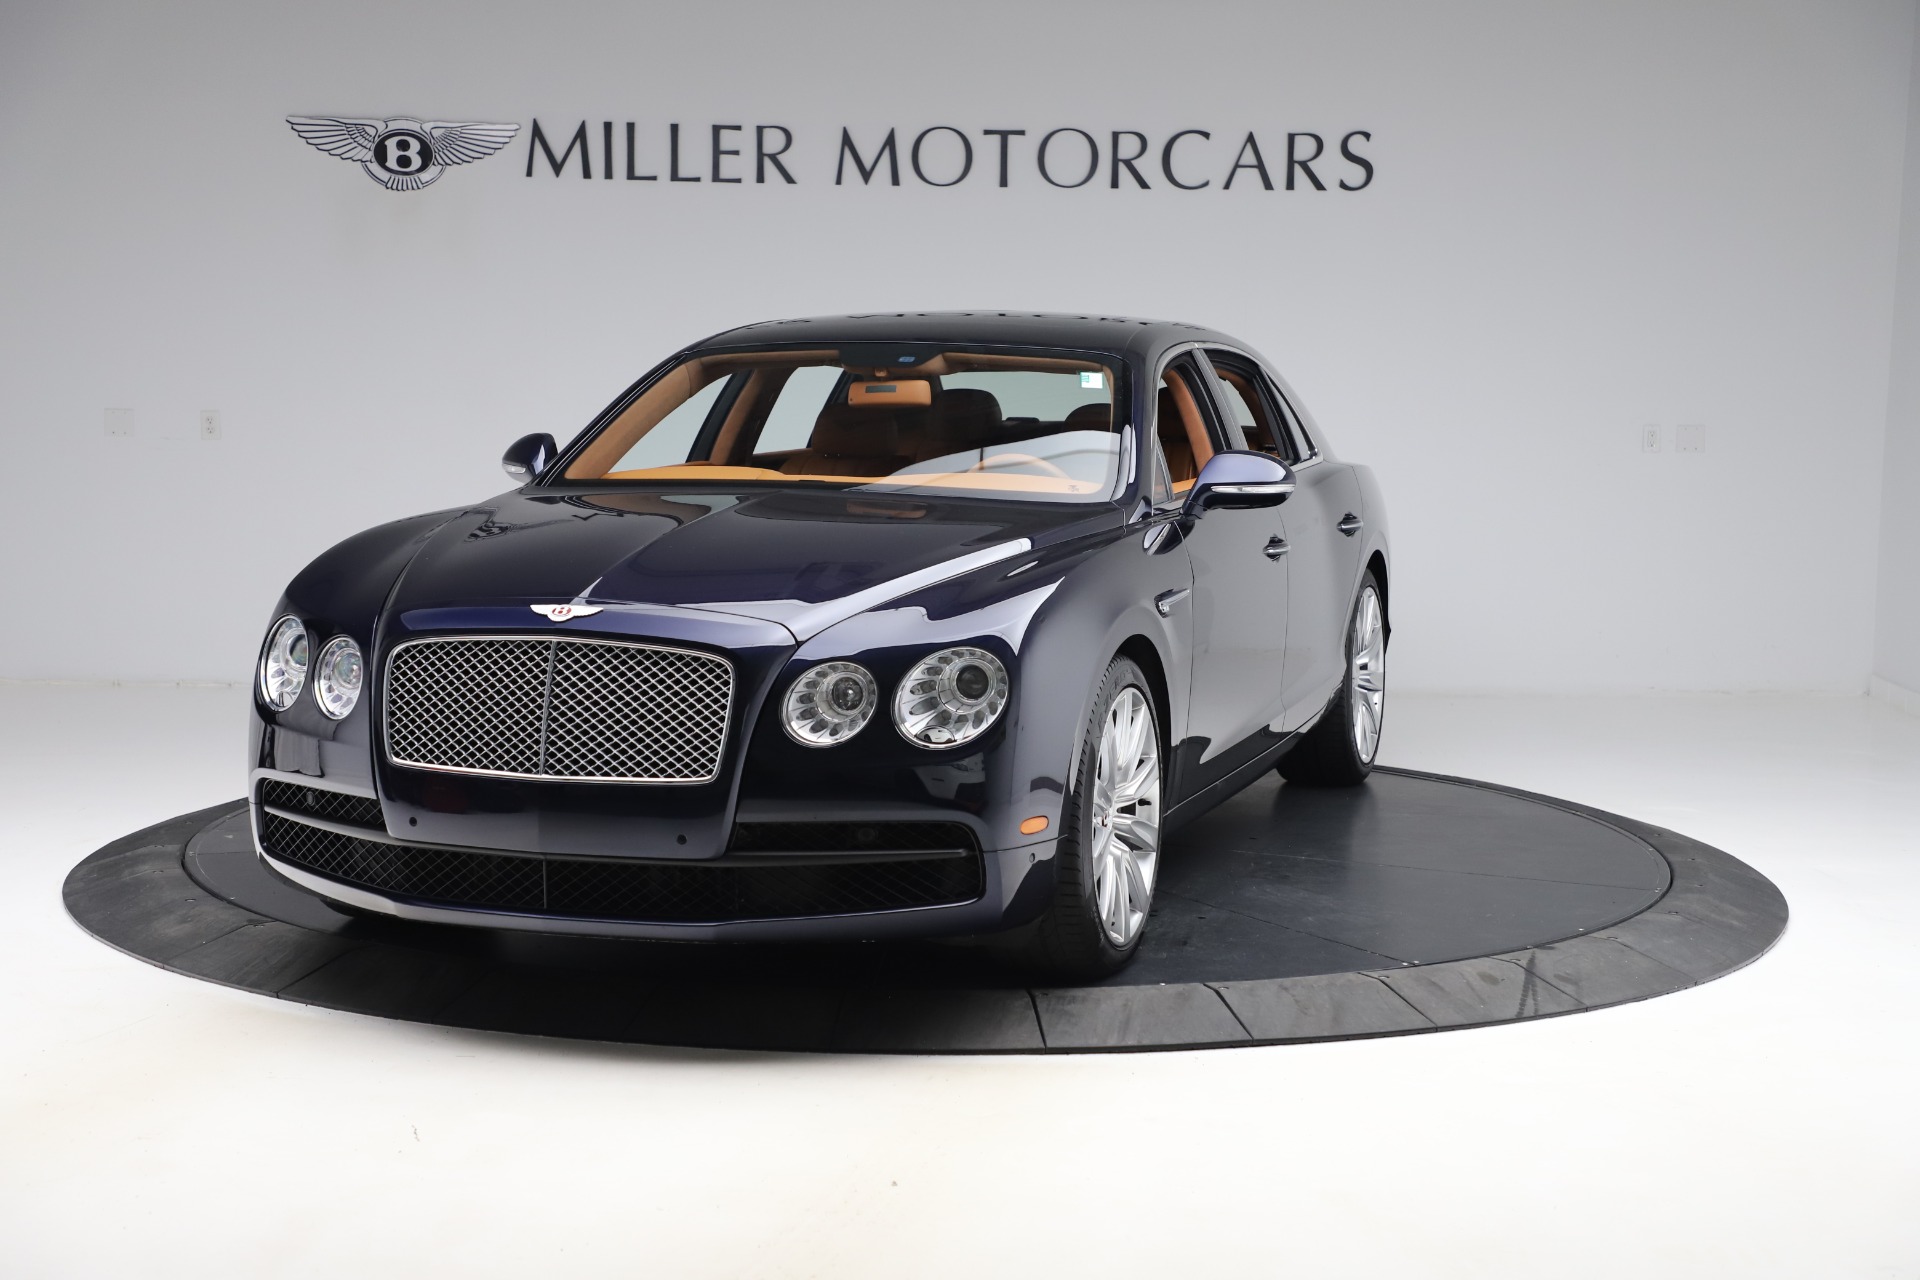 Used 2016 Bentley Flying Spur V8 for sale Sold at Bugatti of Greenwich in Greenwich CT 06830 1